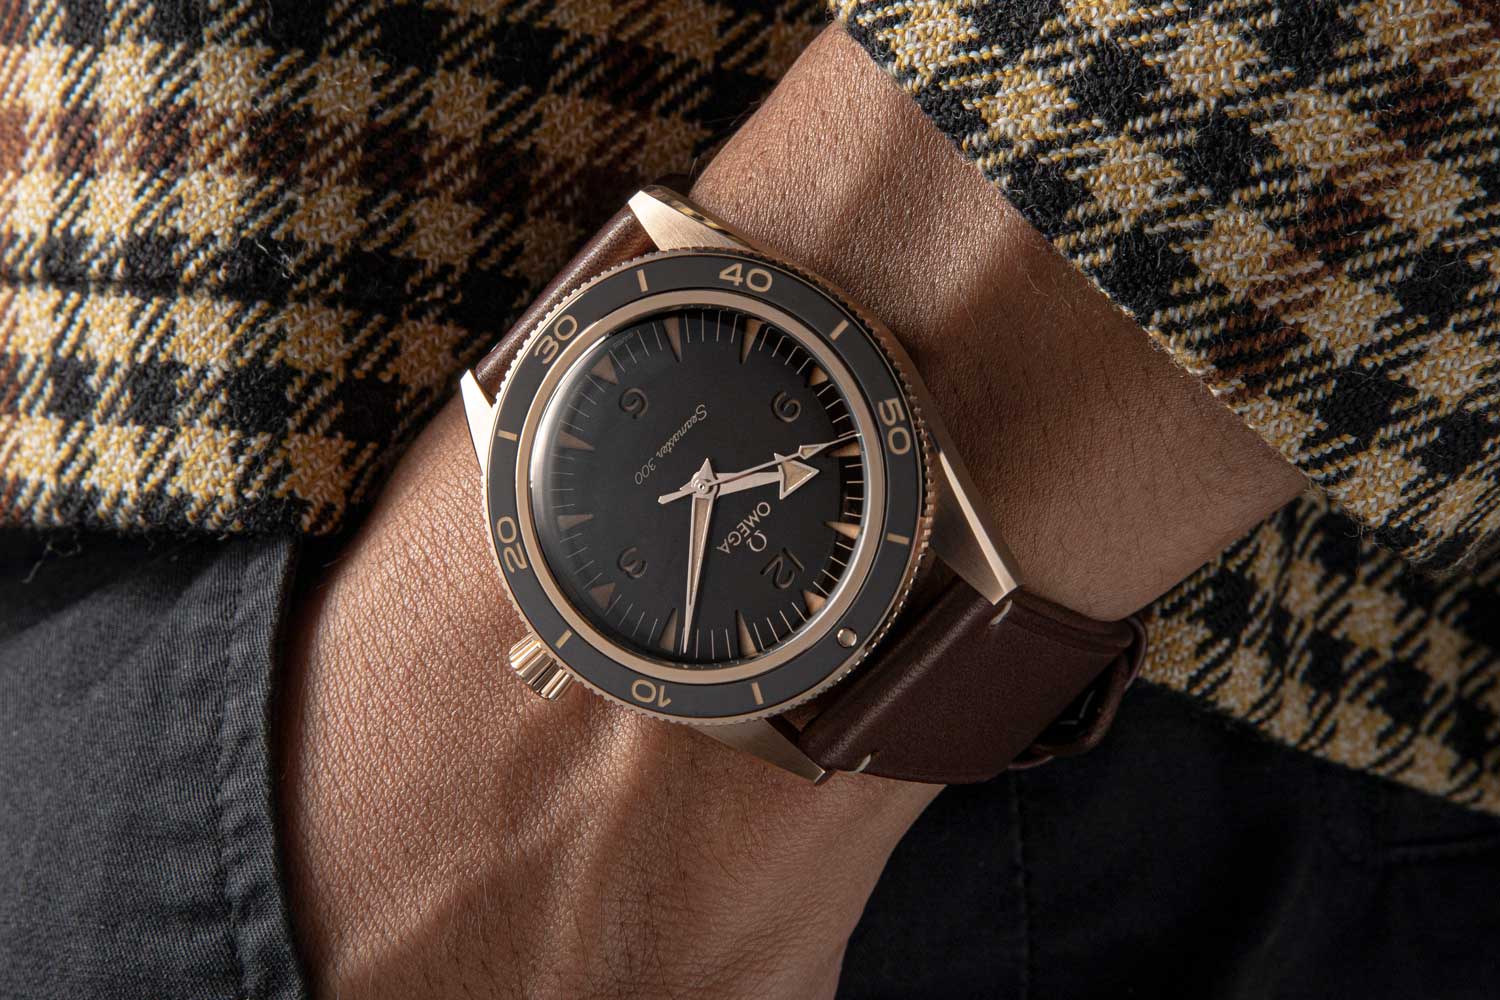 The Seamaster 300 Bronze Gold is made from Omega’s new patent-pending alloy that features 50 percent copper and 37.5 percent gold. Omega also uses palladium to enhance the hue of the material to make it much more luminous. (©Revolution)